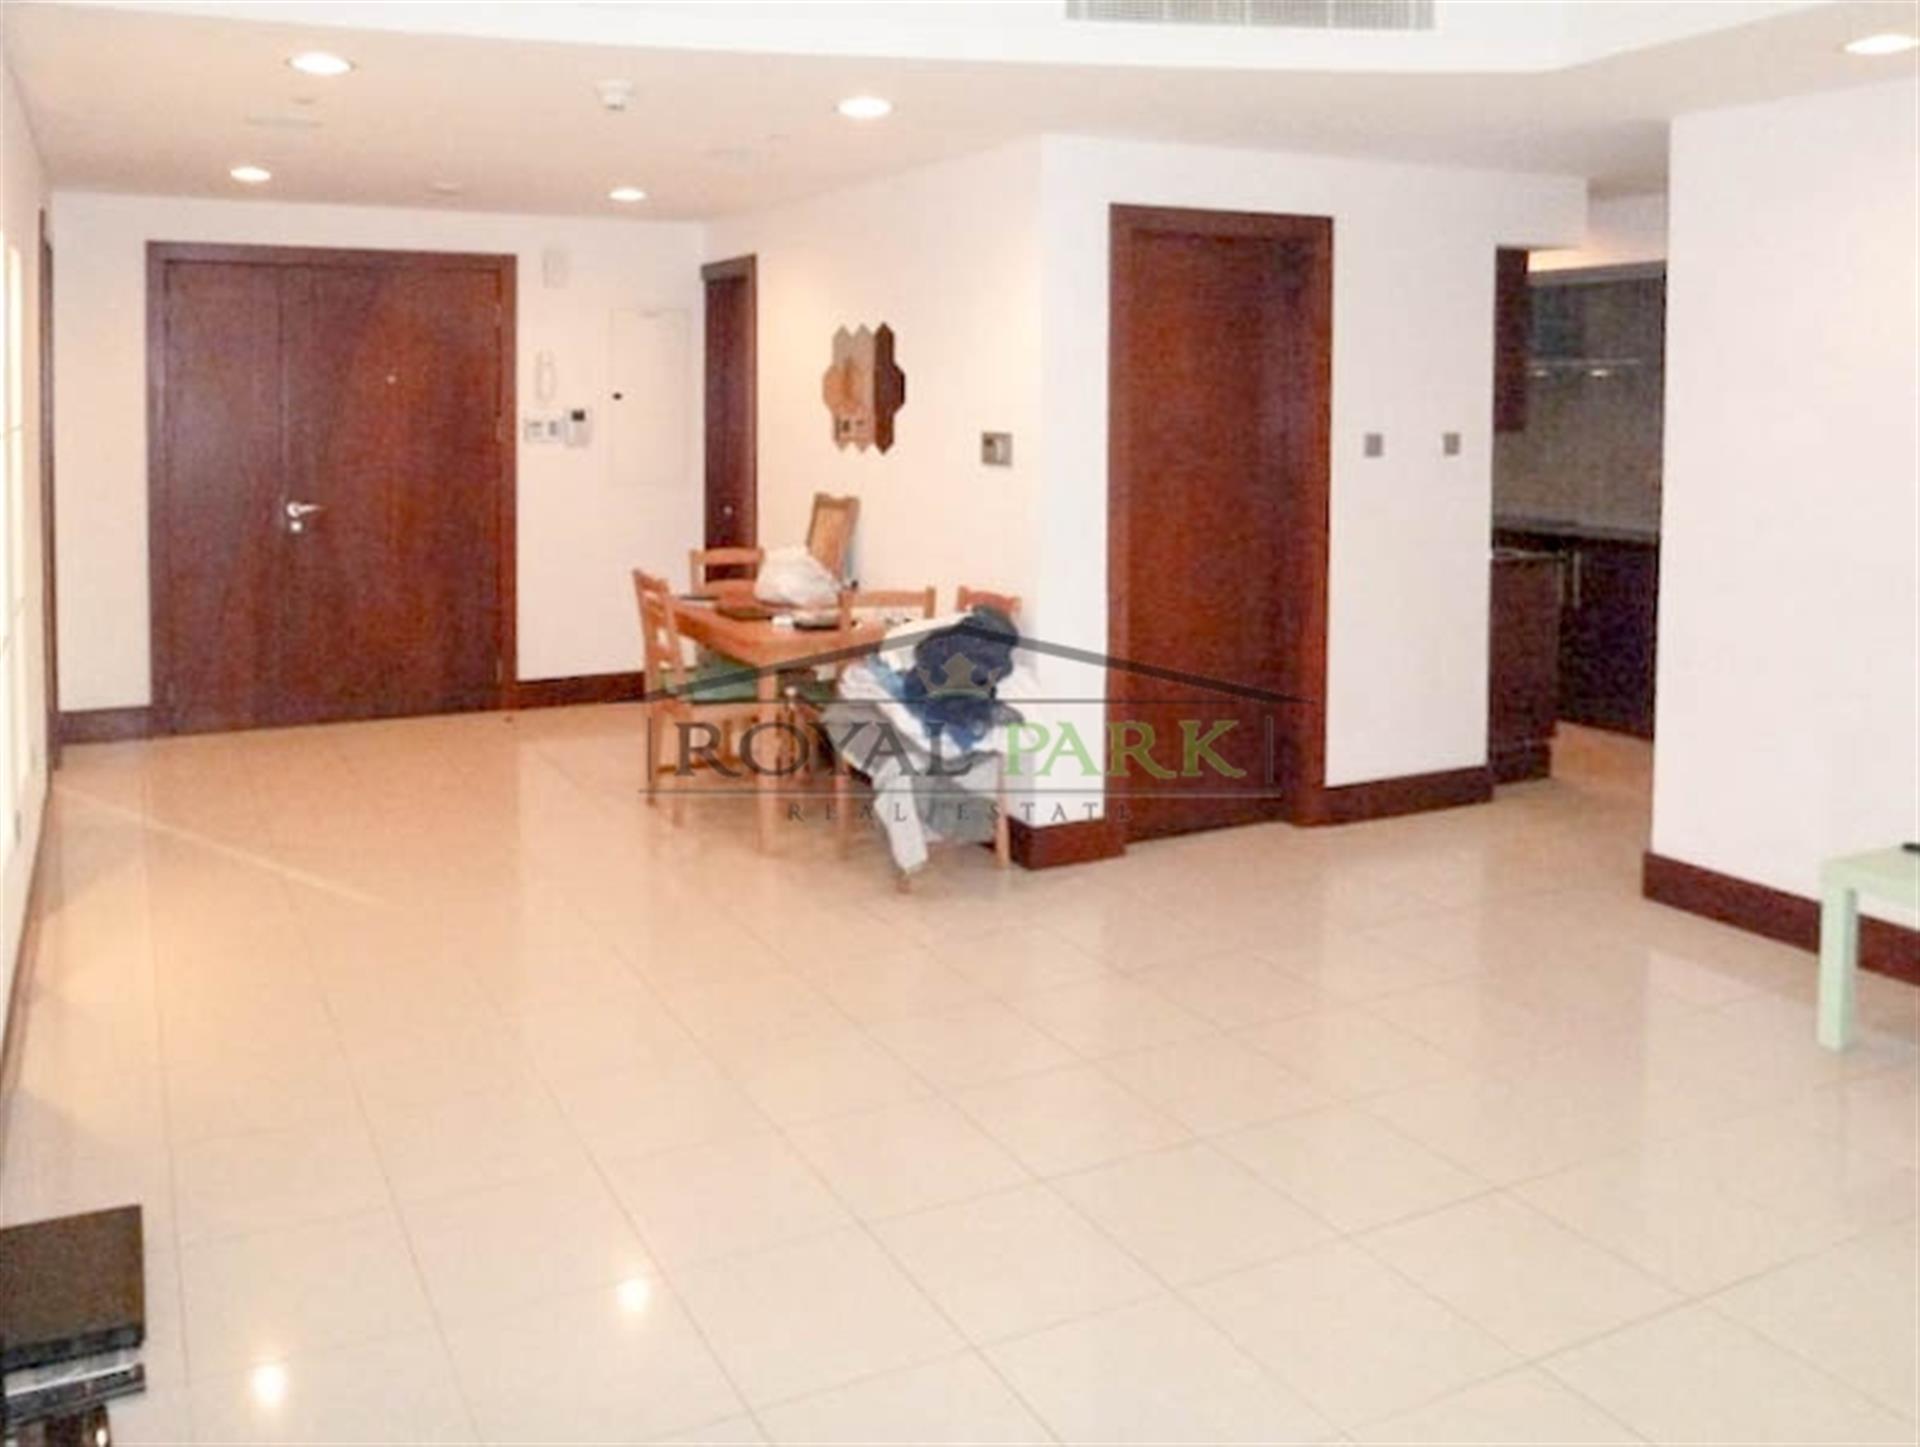 3 Bedroom In Dwtc Residence For Sale